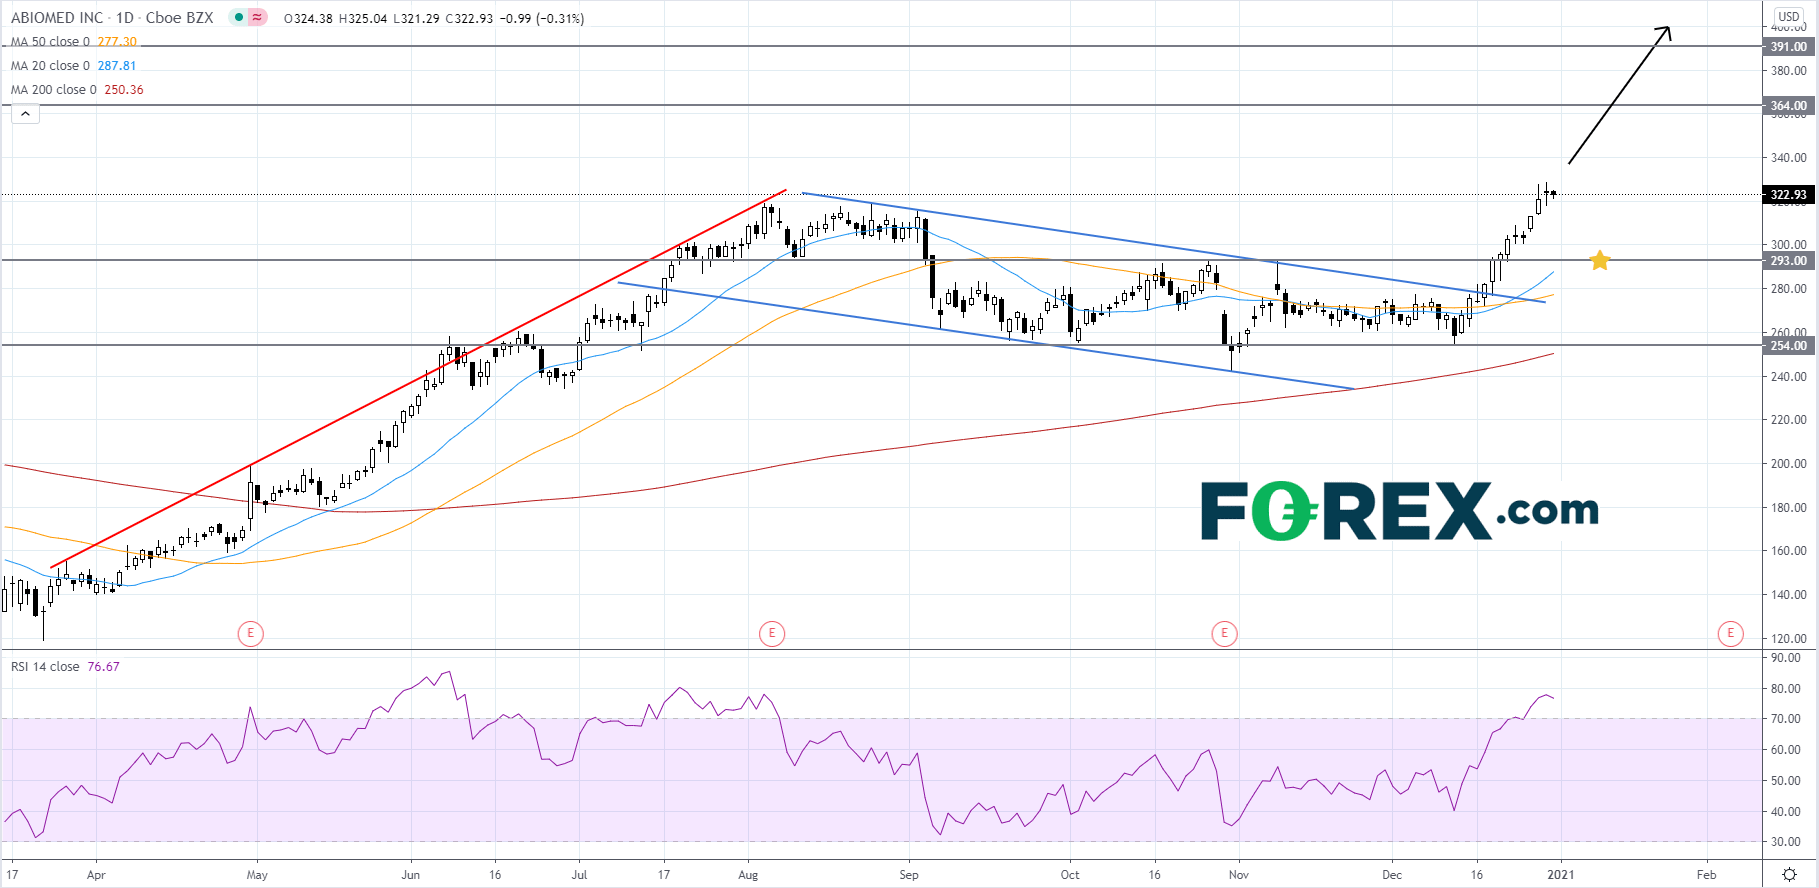 Market chart demonstrating Pattern Play Abiomed. Published in December 2020 by FOREX.com